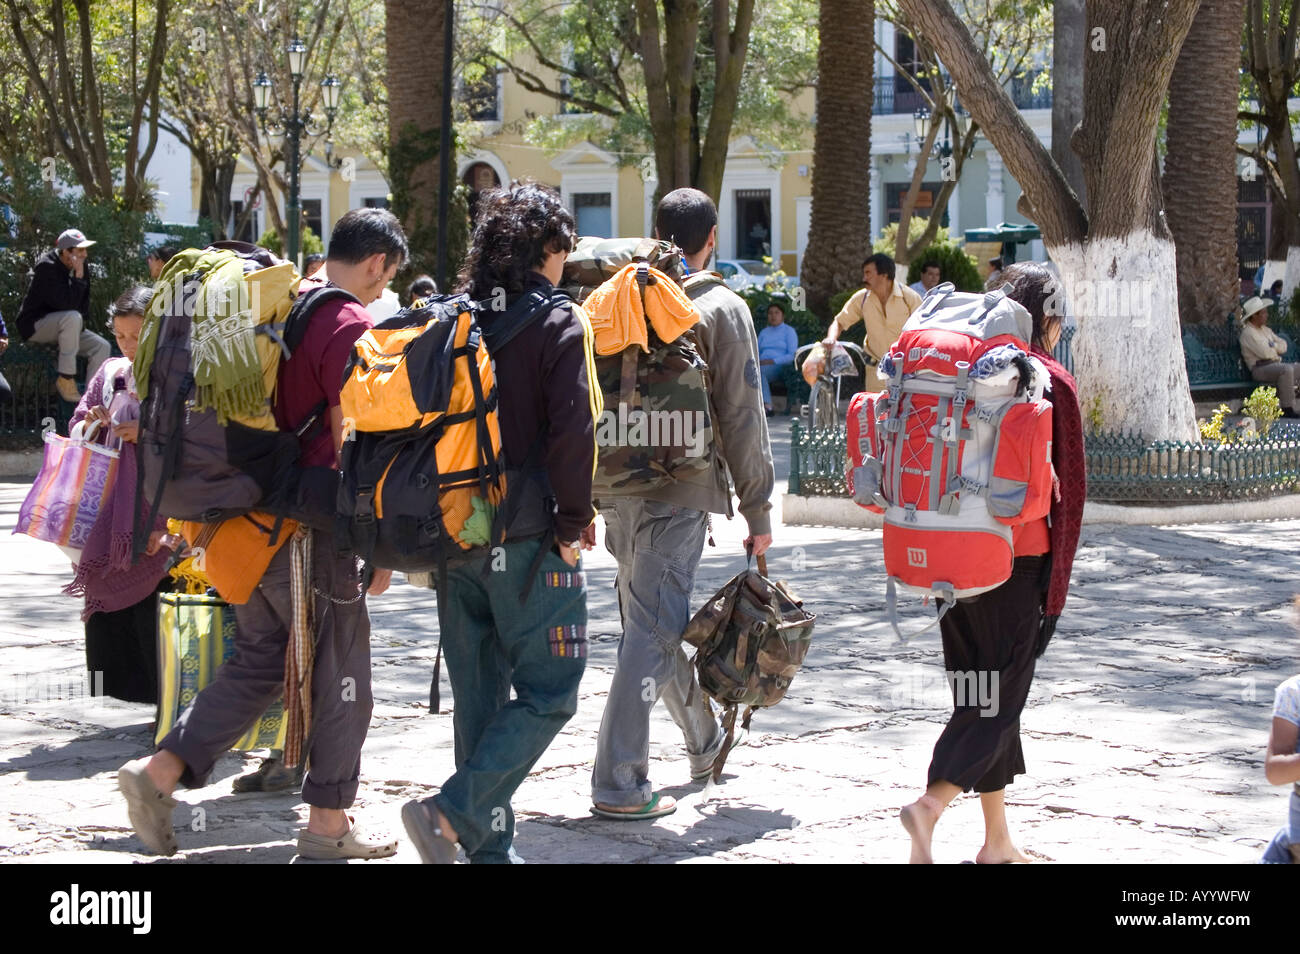 Backpacking Tourist in a park in Mexico Stock Photo